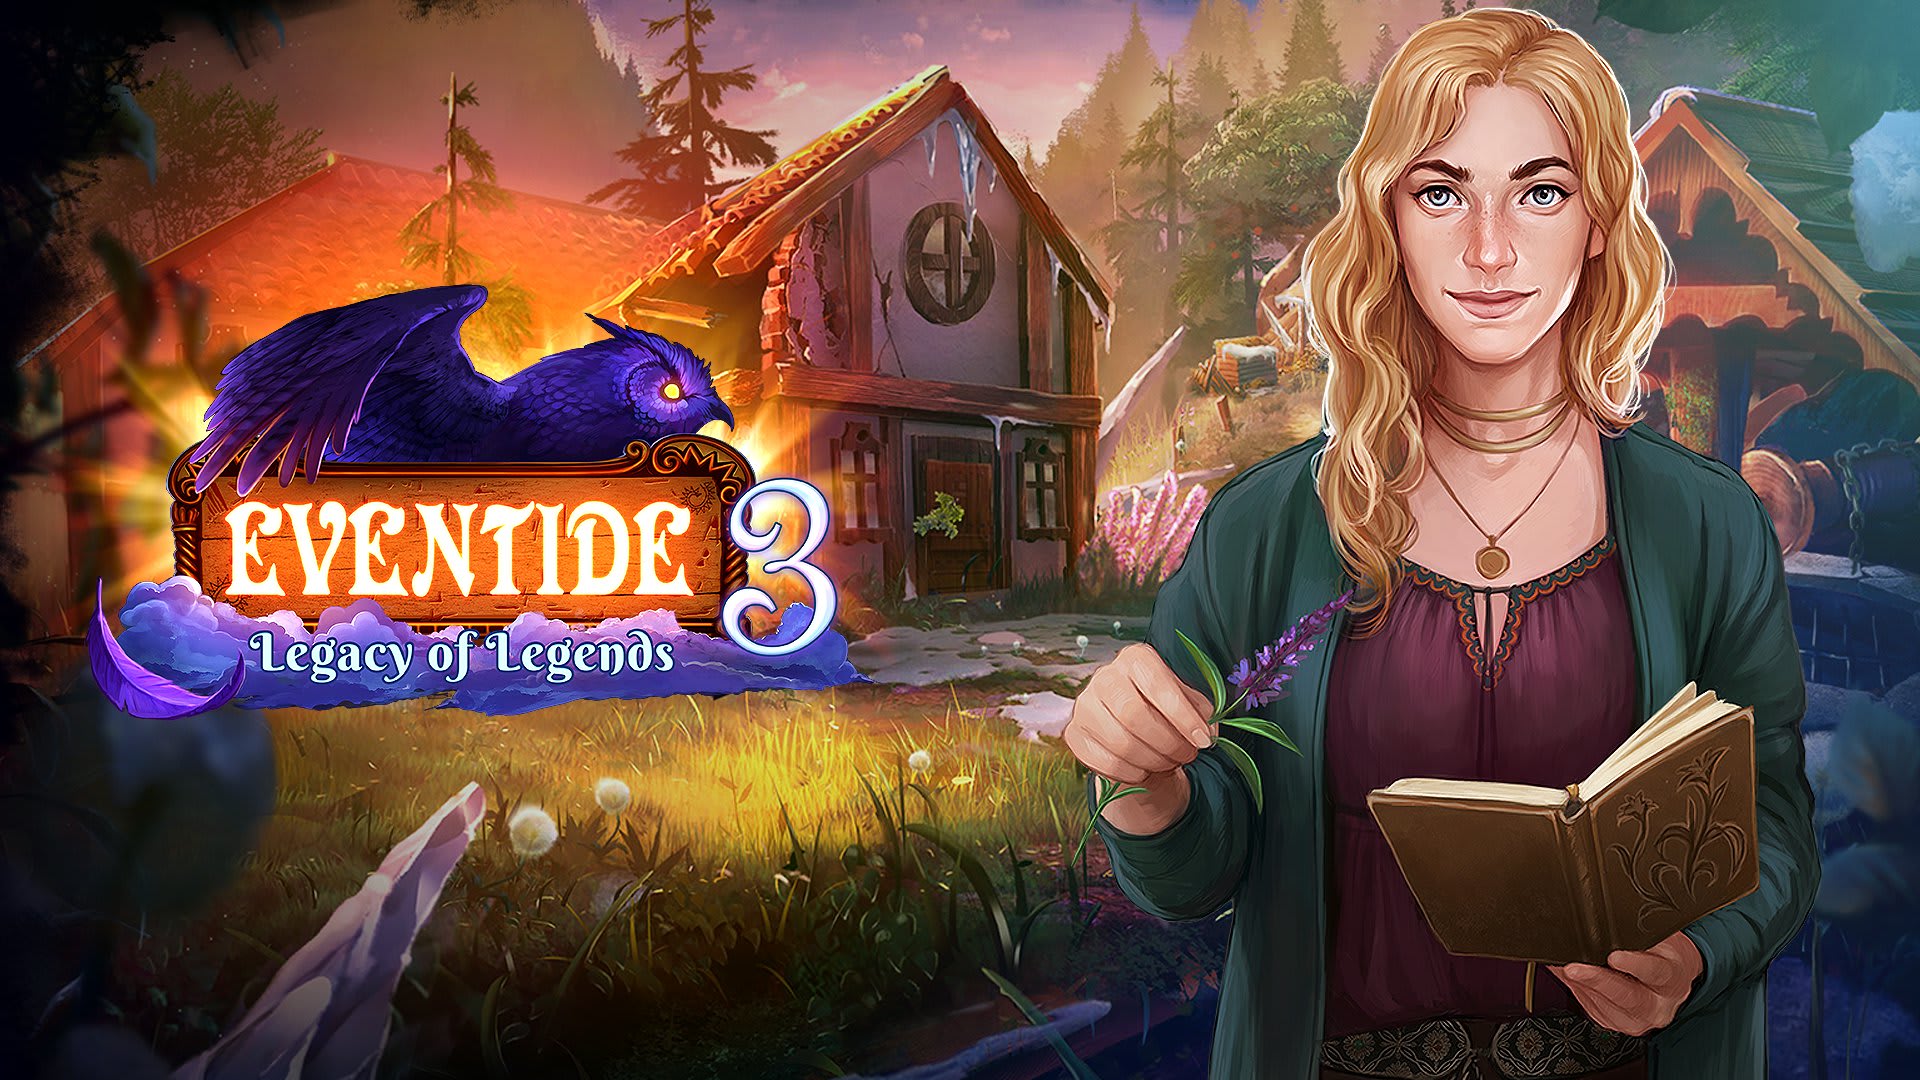 Eventide 3: Legacy of Legends 1